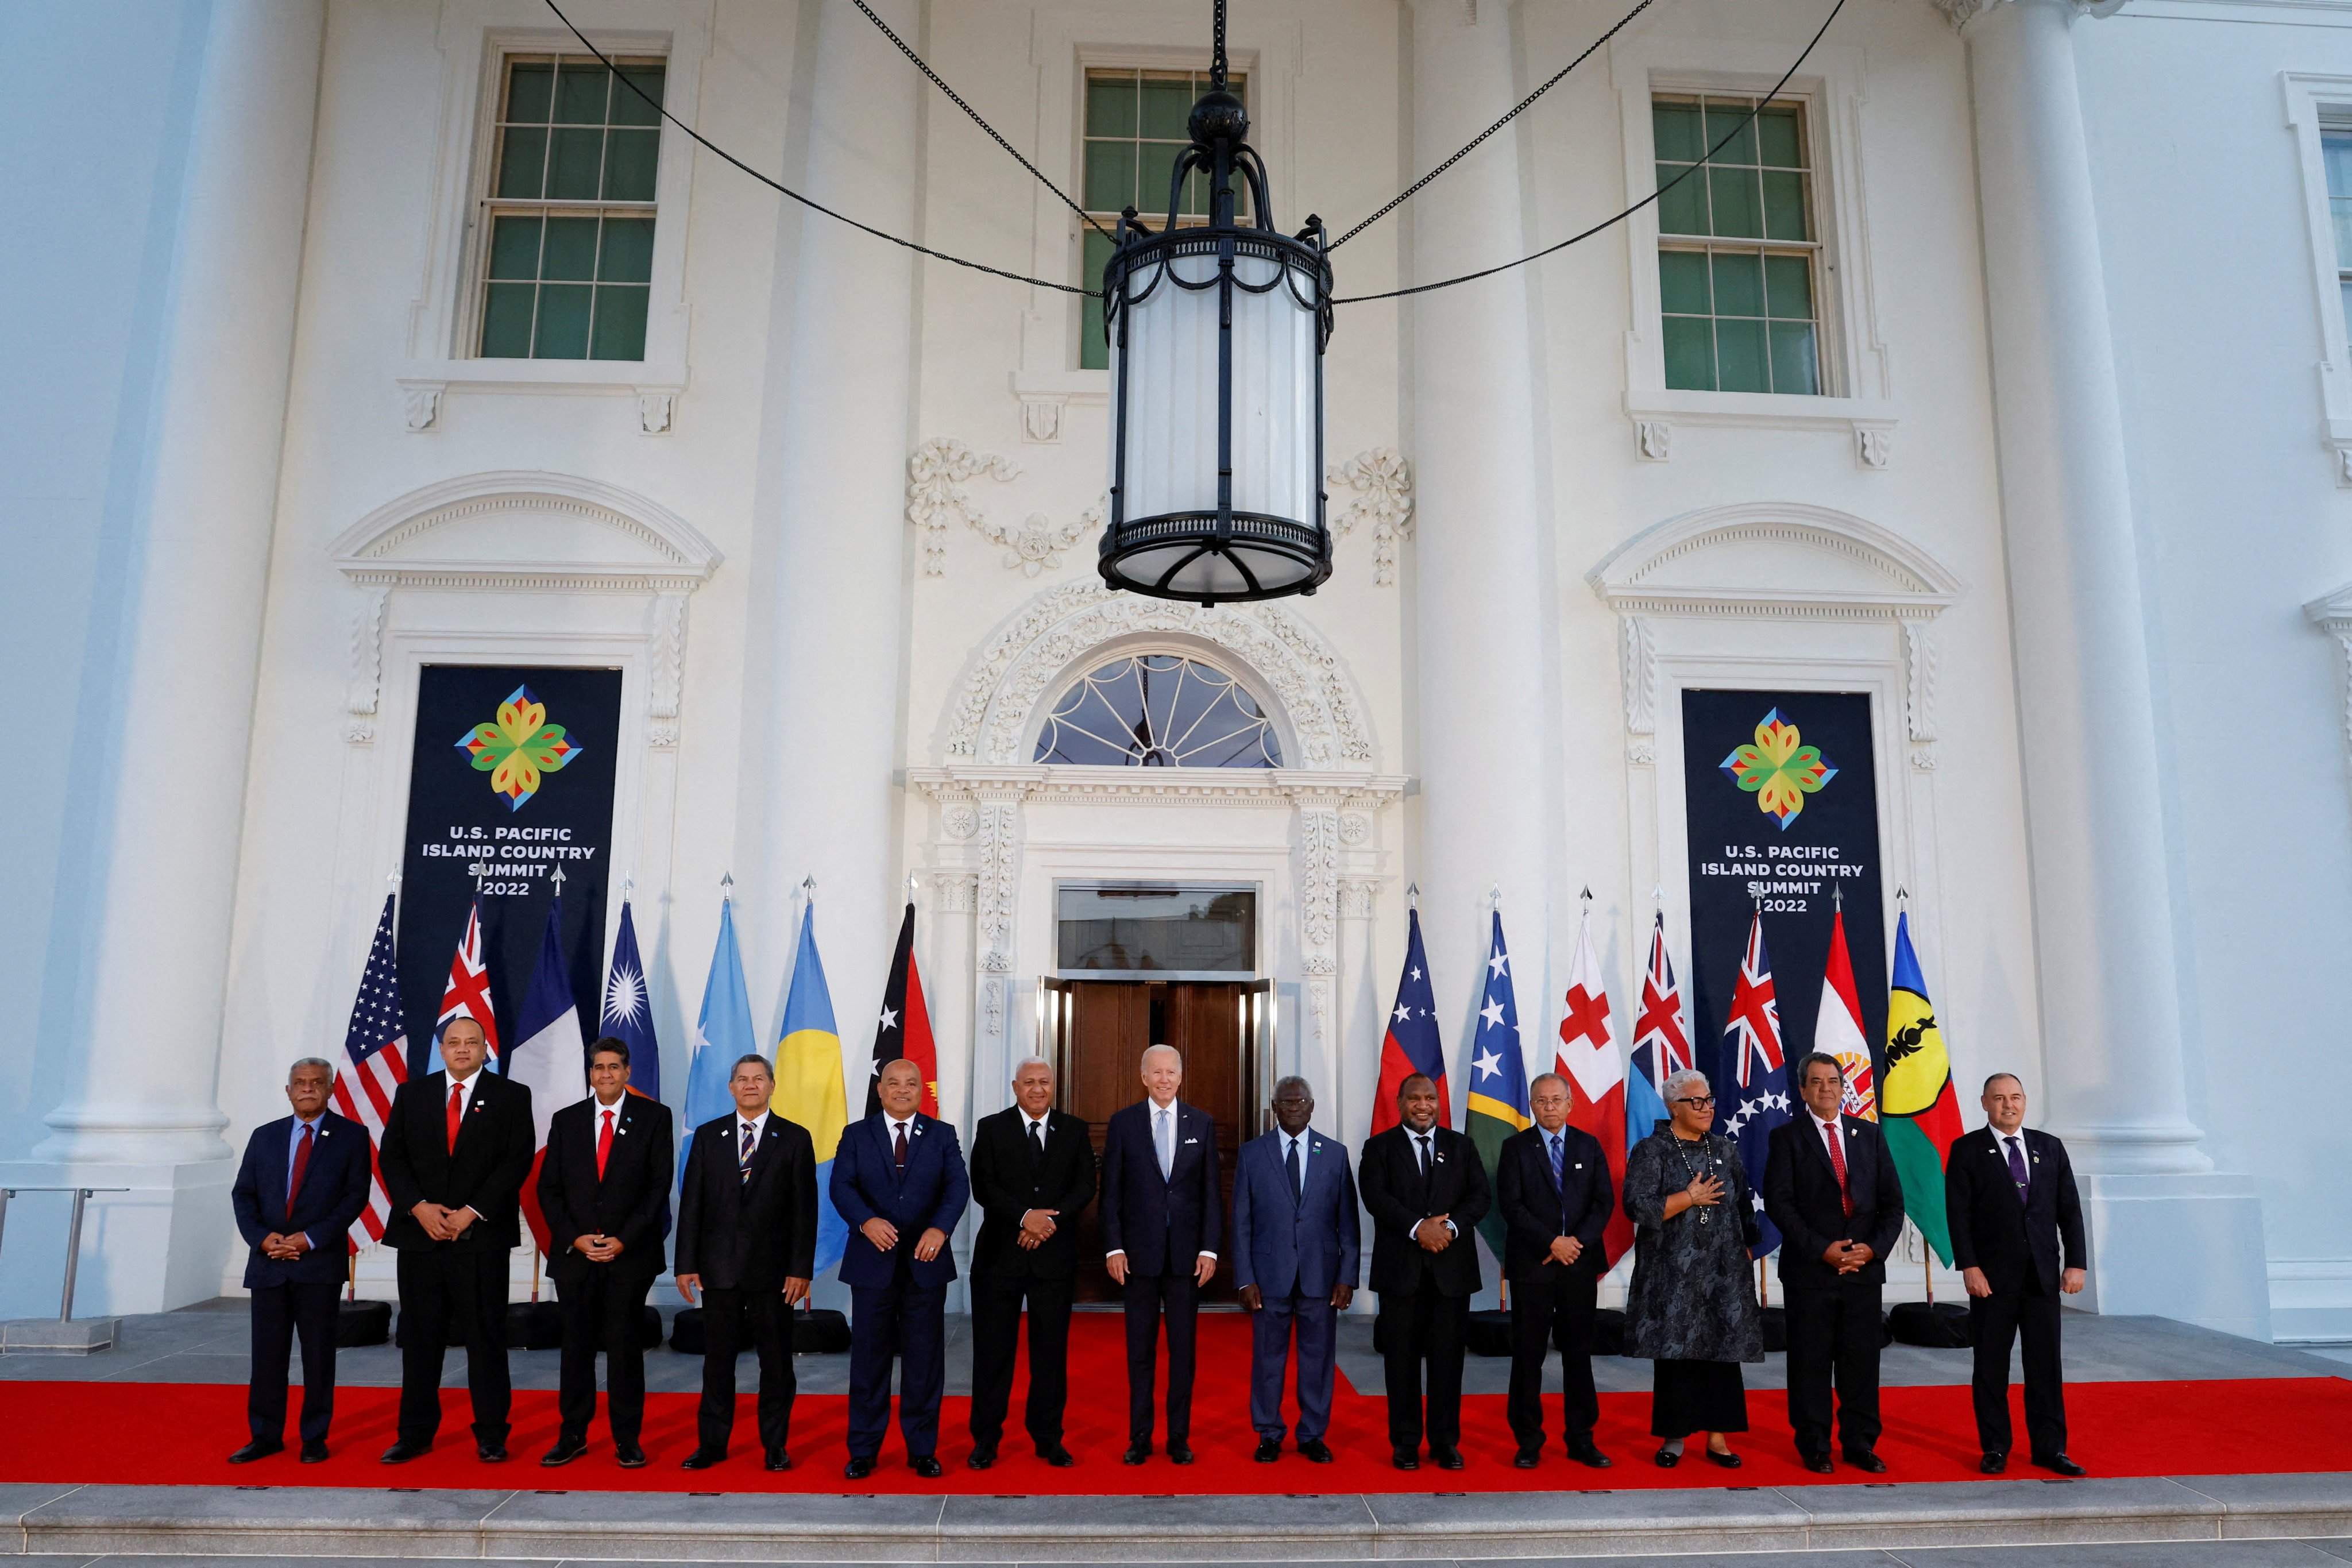 At the White House in Washington, in September last year, President Joe Biden poses with leaders from the US- Pacific Island Country Summit. Photo: Reuters